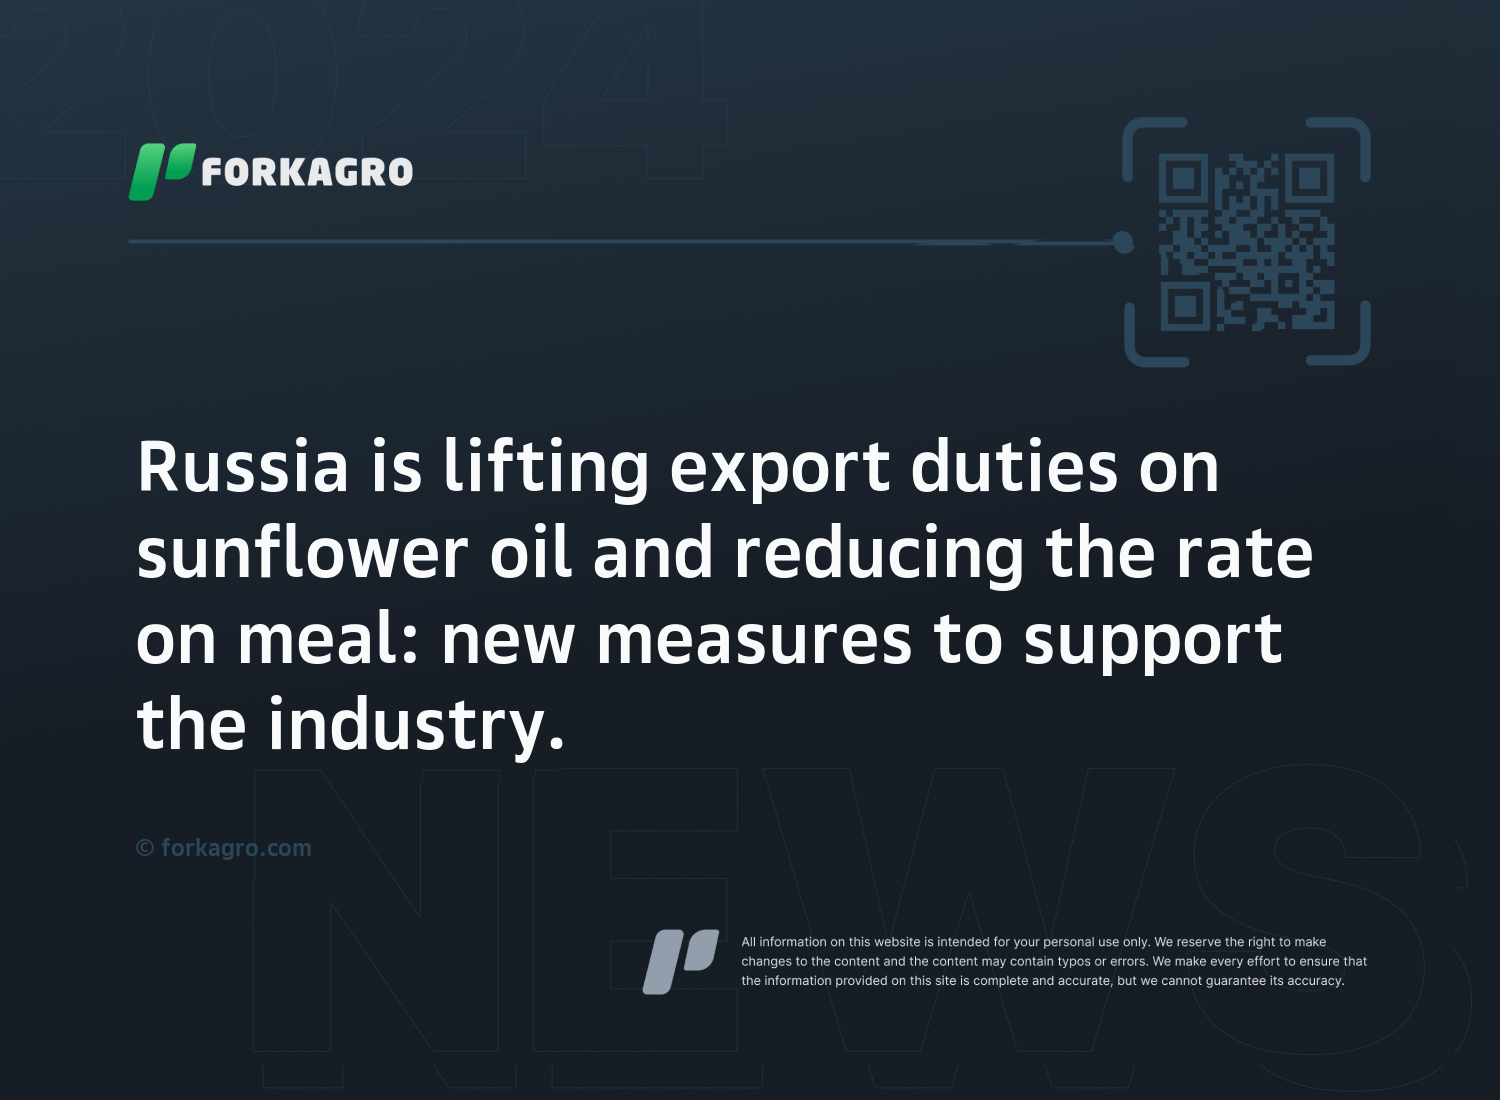 Russia is lifting export duties on sunflower oil and reducing the rate on meal: new measures to support the industry.